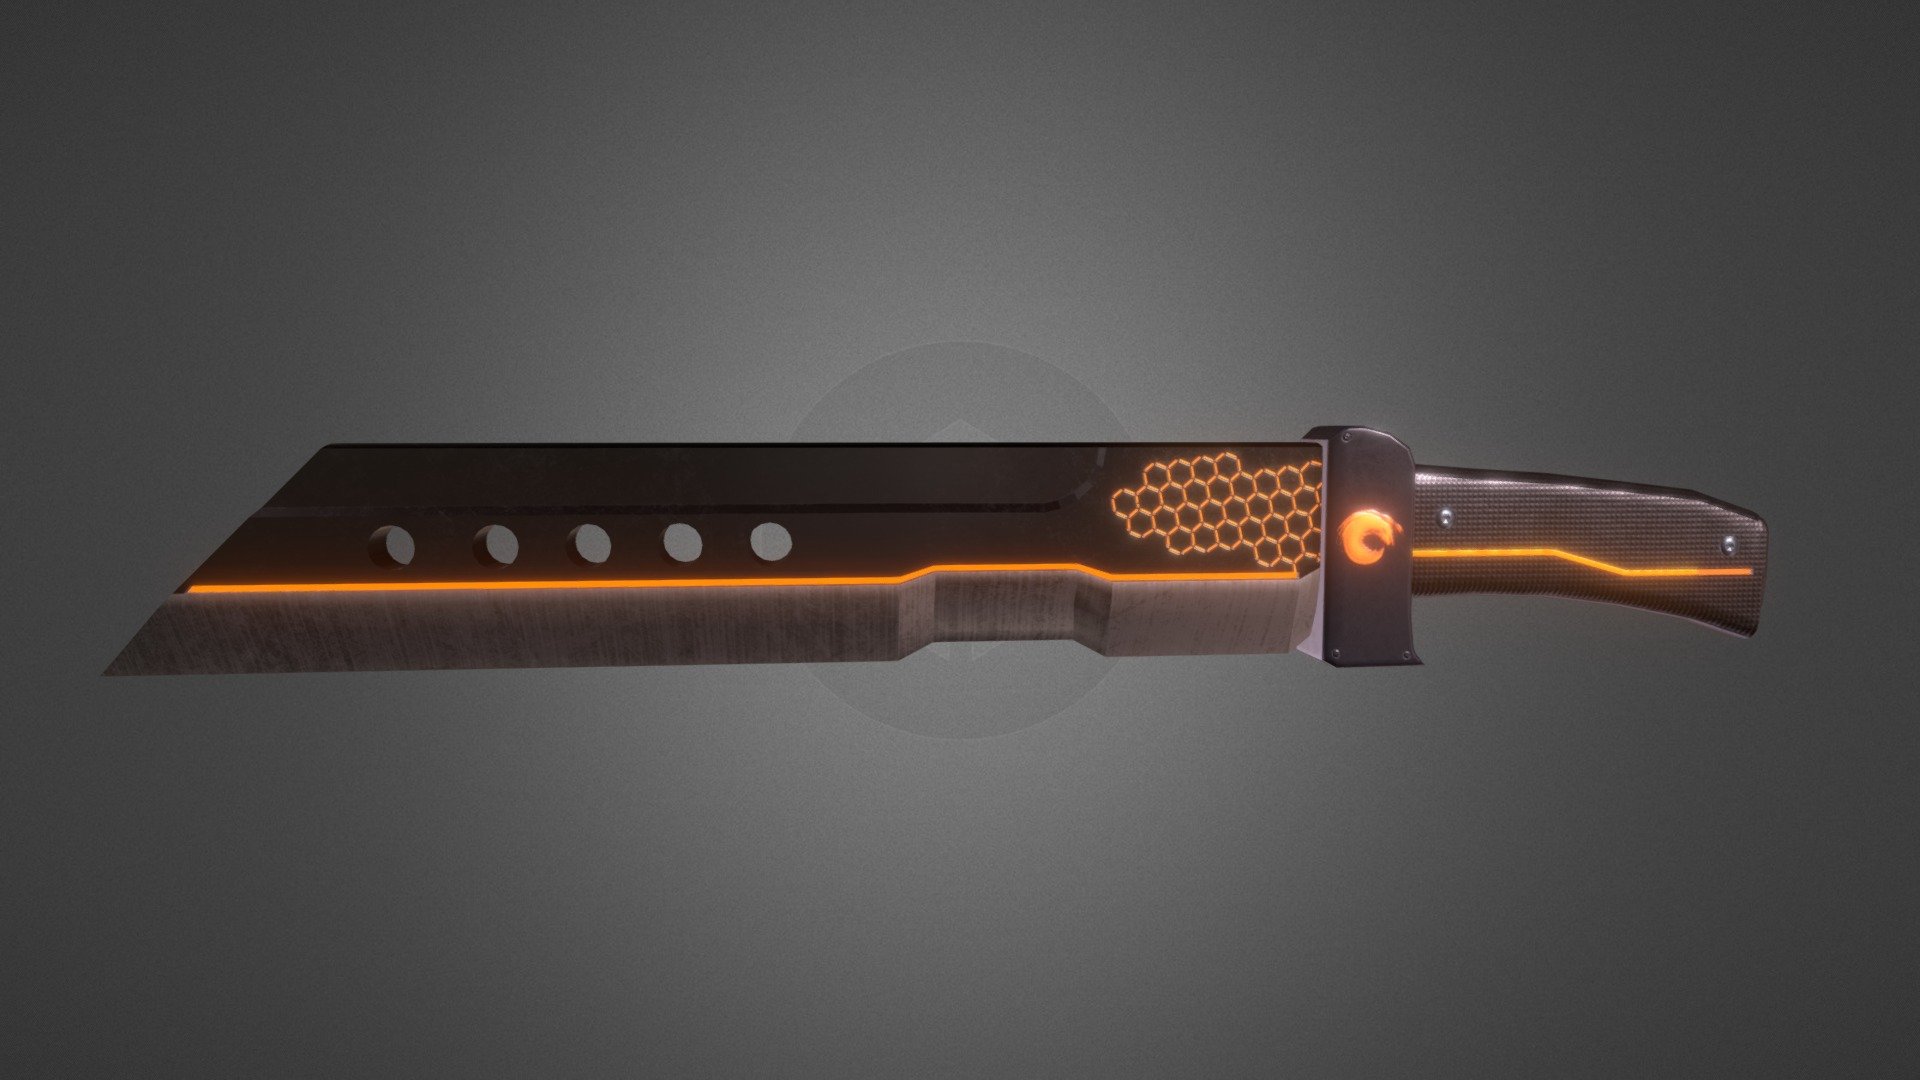 This knife was intended to be used in a first-person perspective game. It is one of the main weapons to be used 3d model